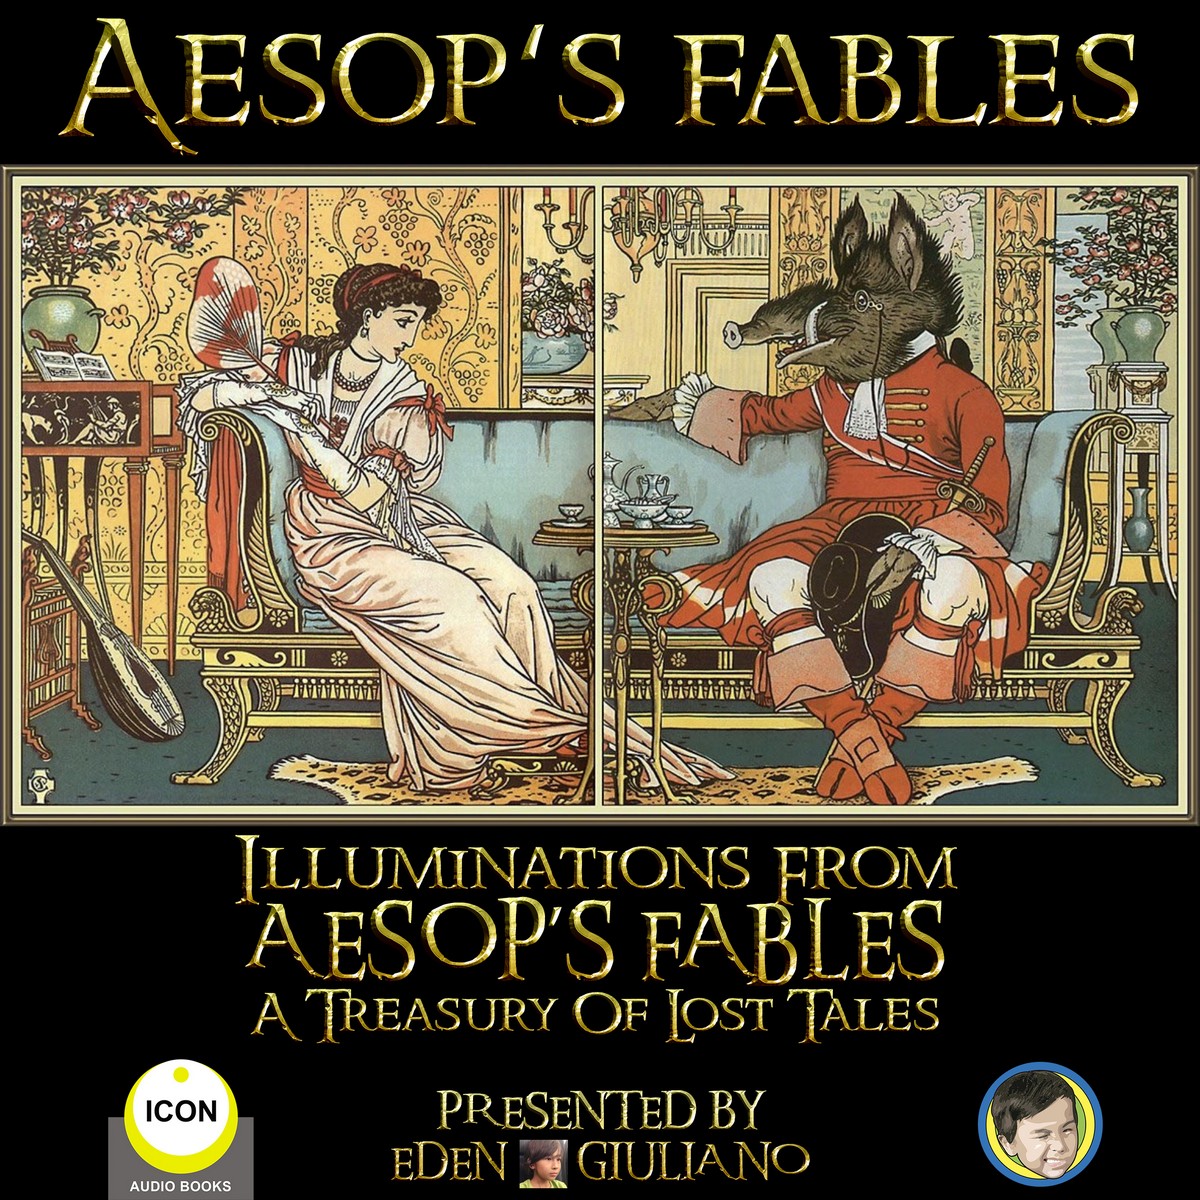 Aesop‘s Fables – Illuminations From Aesop‘s Fables A Treasury Of Lost Tales